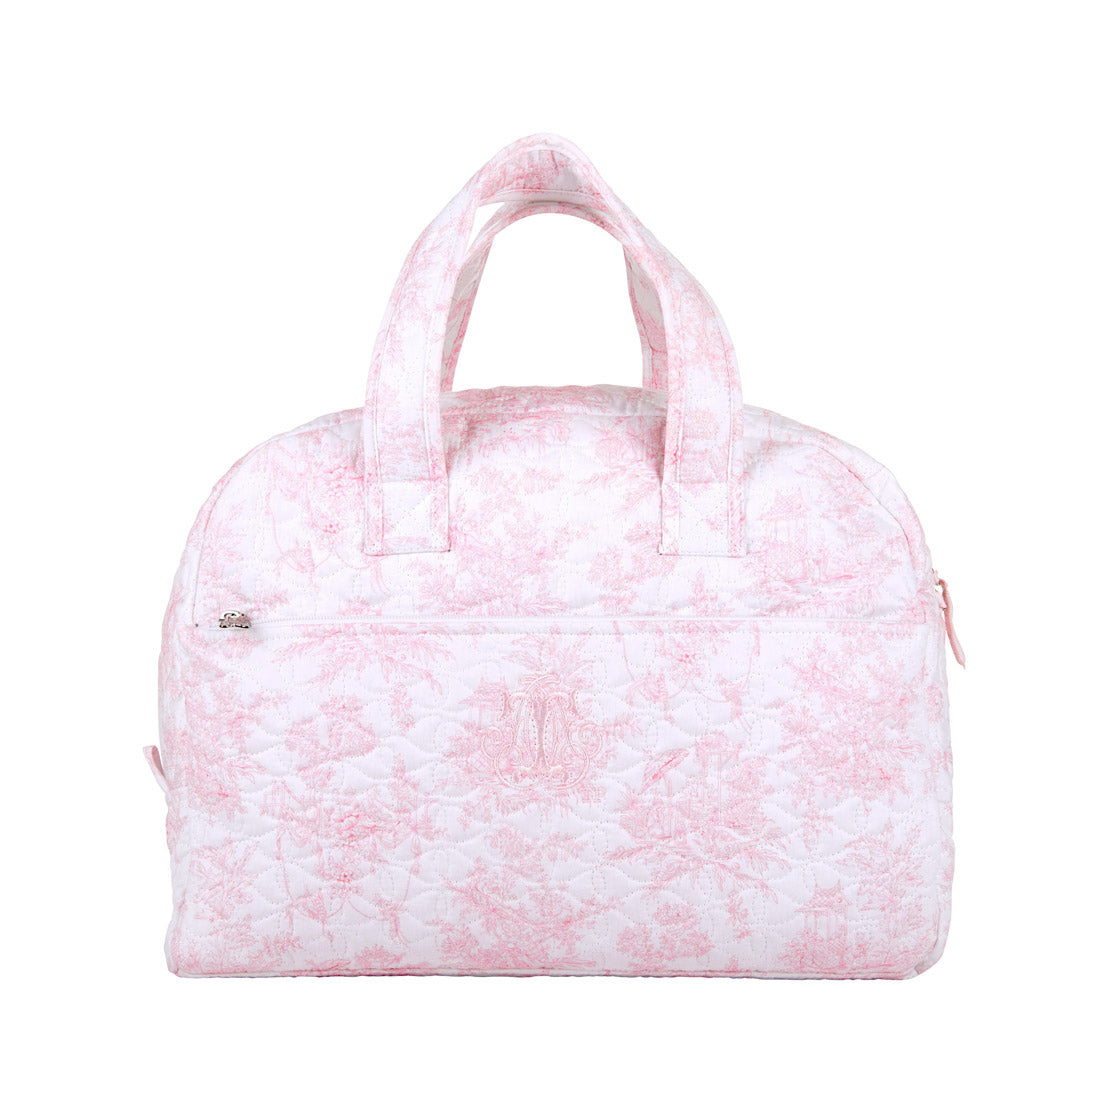 Theophile & Patachou Toiletry Bag Quilted - Sweet Pink